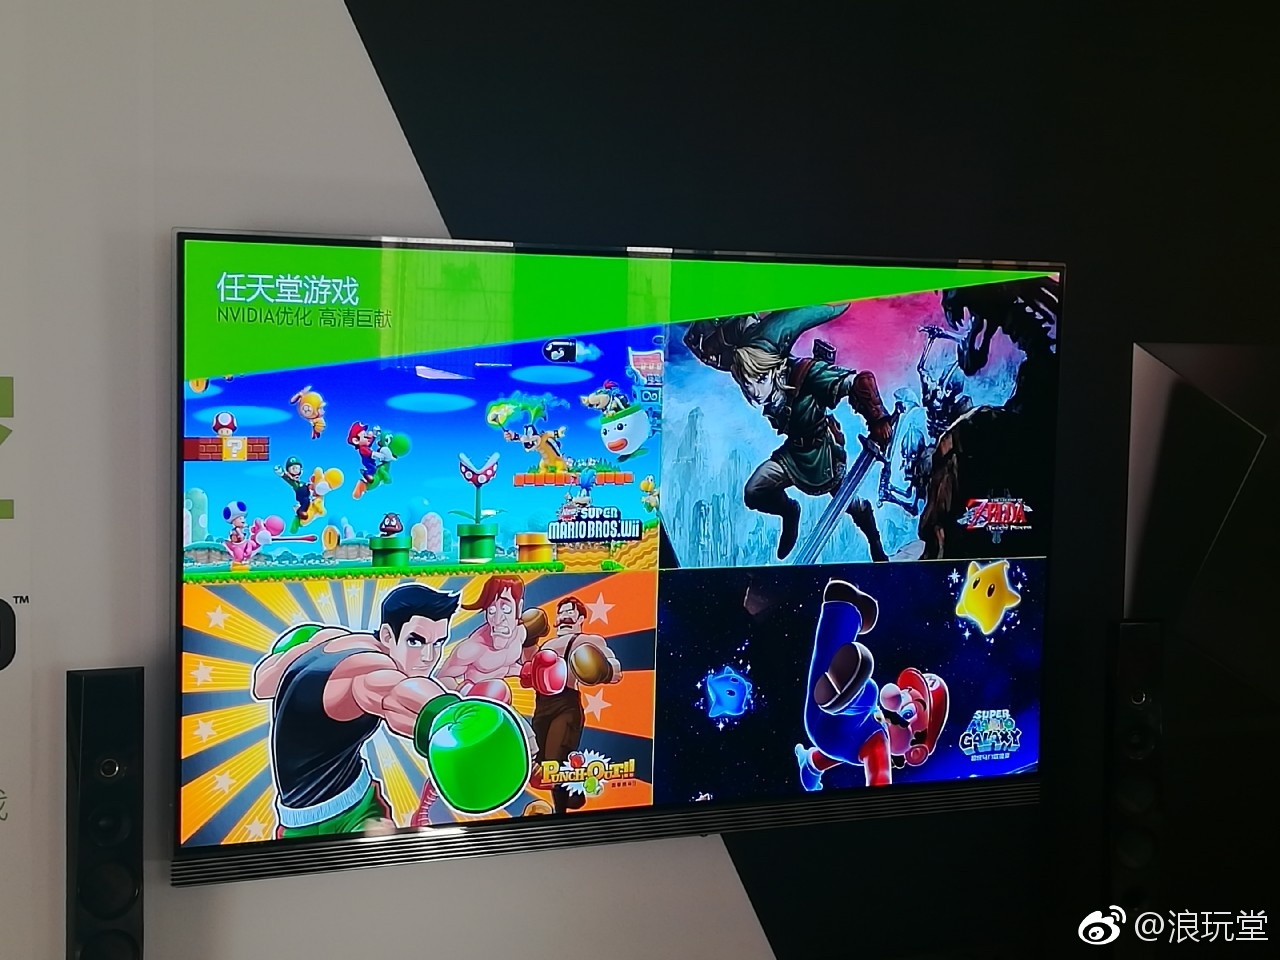 play switch games on nvidia shield